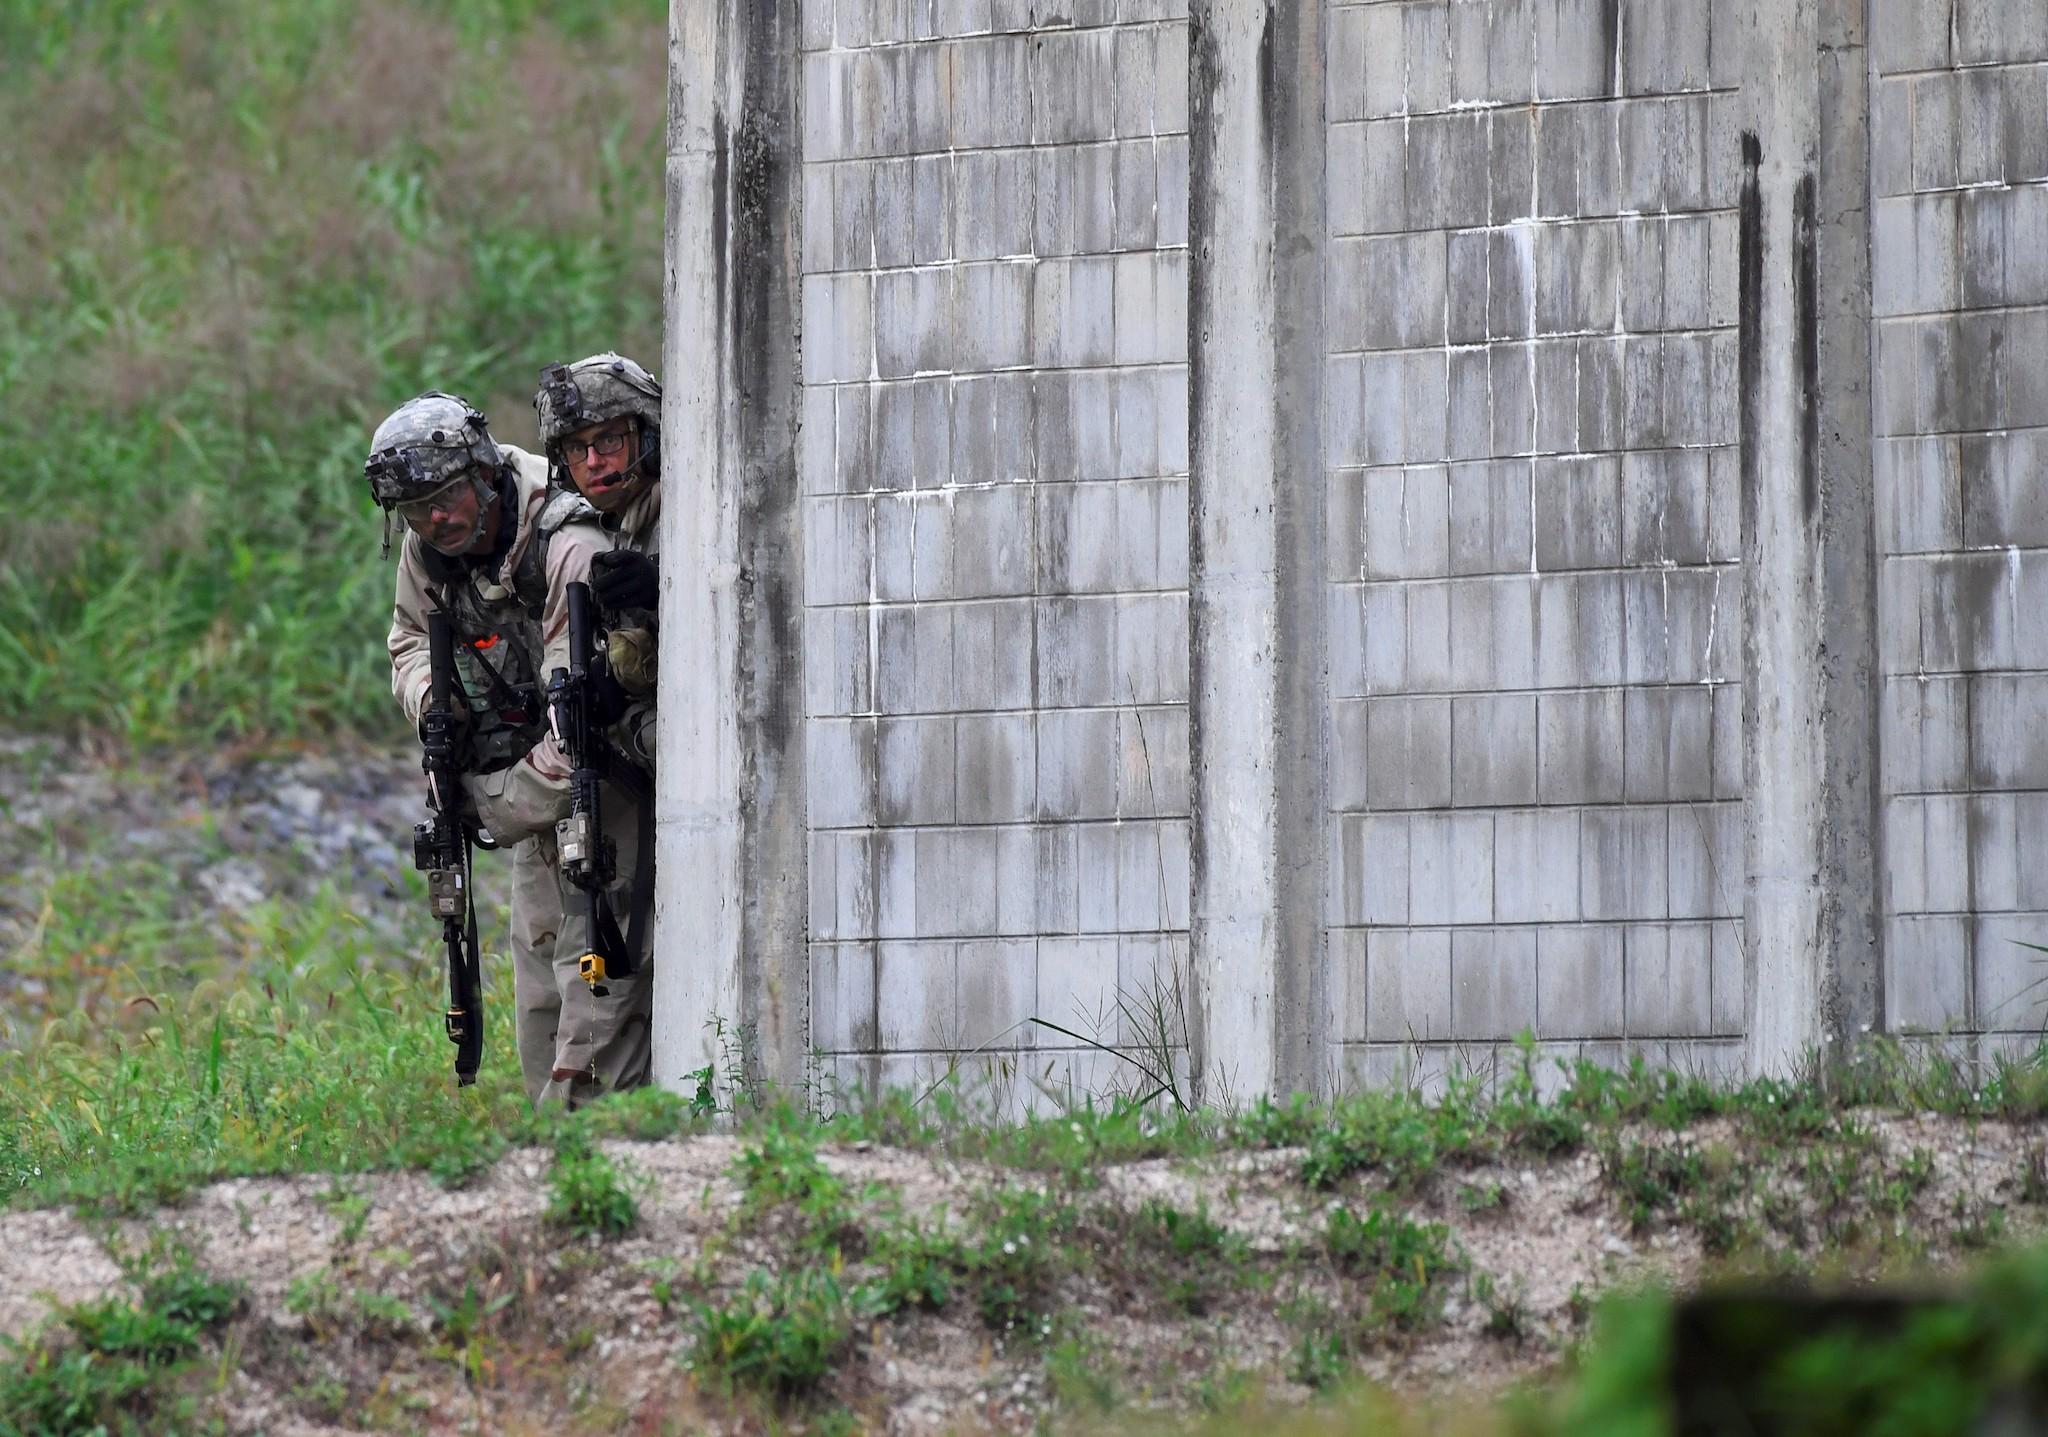 US soldiers participate in a South Korea-US combined arms collective training exercise at the US army's Rodriguez shooting range in Pocheon, about 70 km northeast of Seoul near the heavily-fortified border with North Korea on September 19, 2017